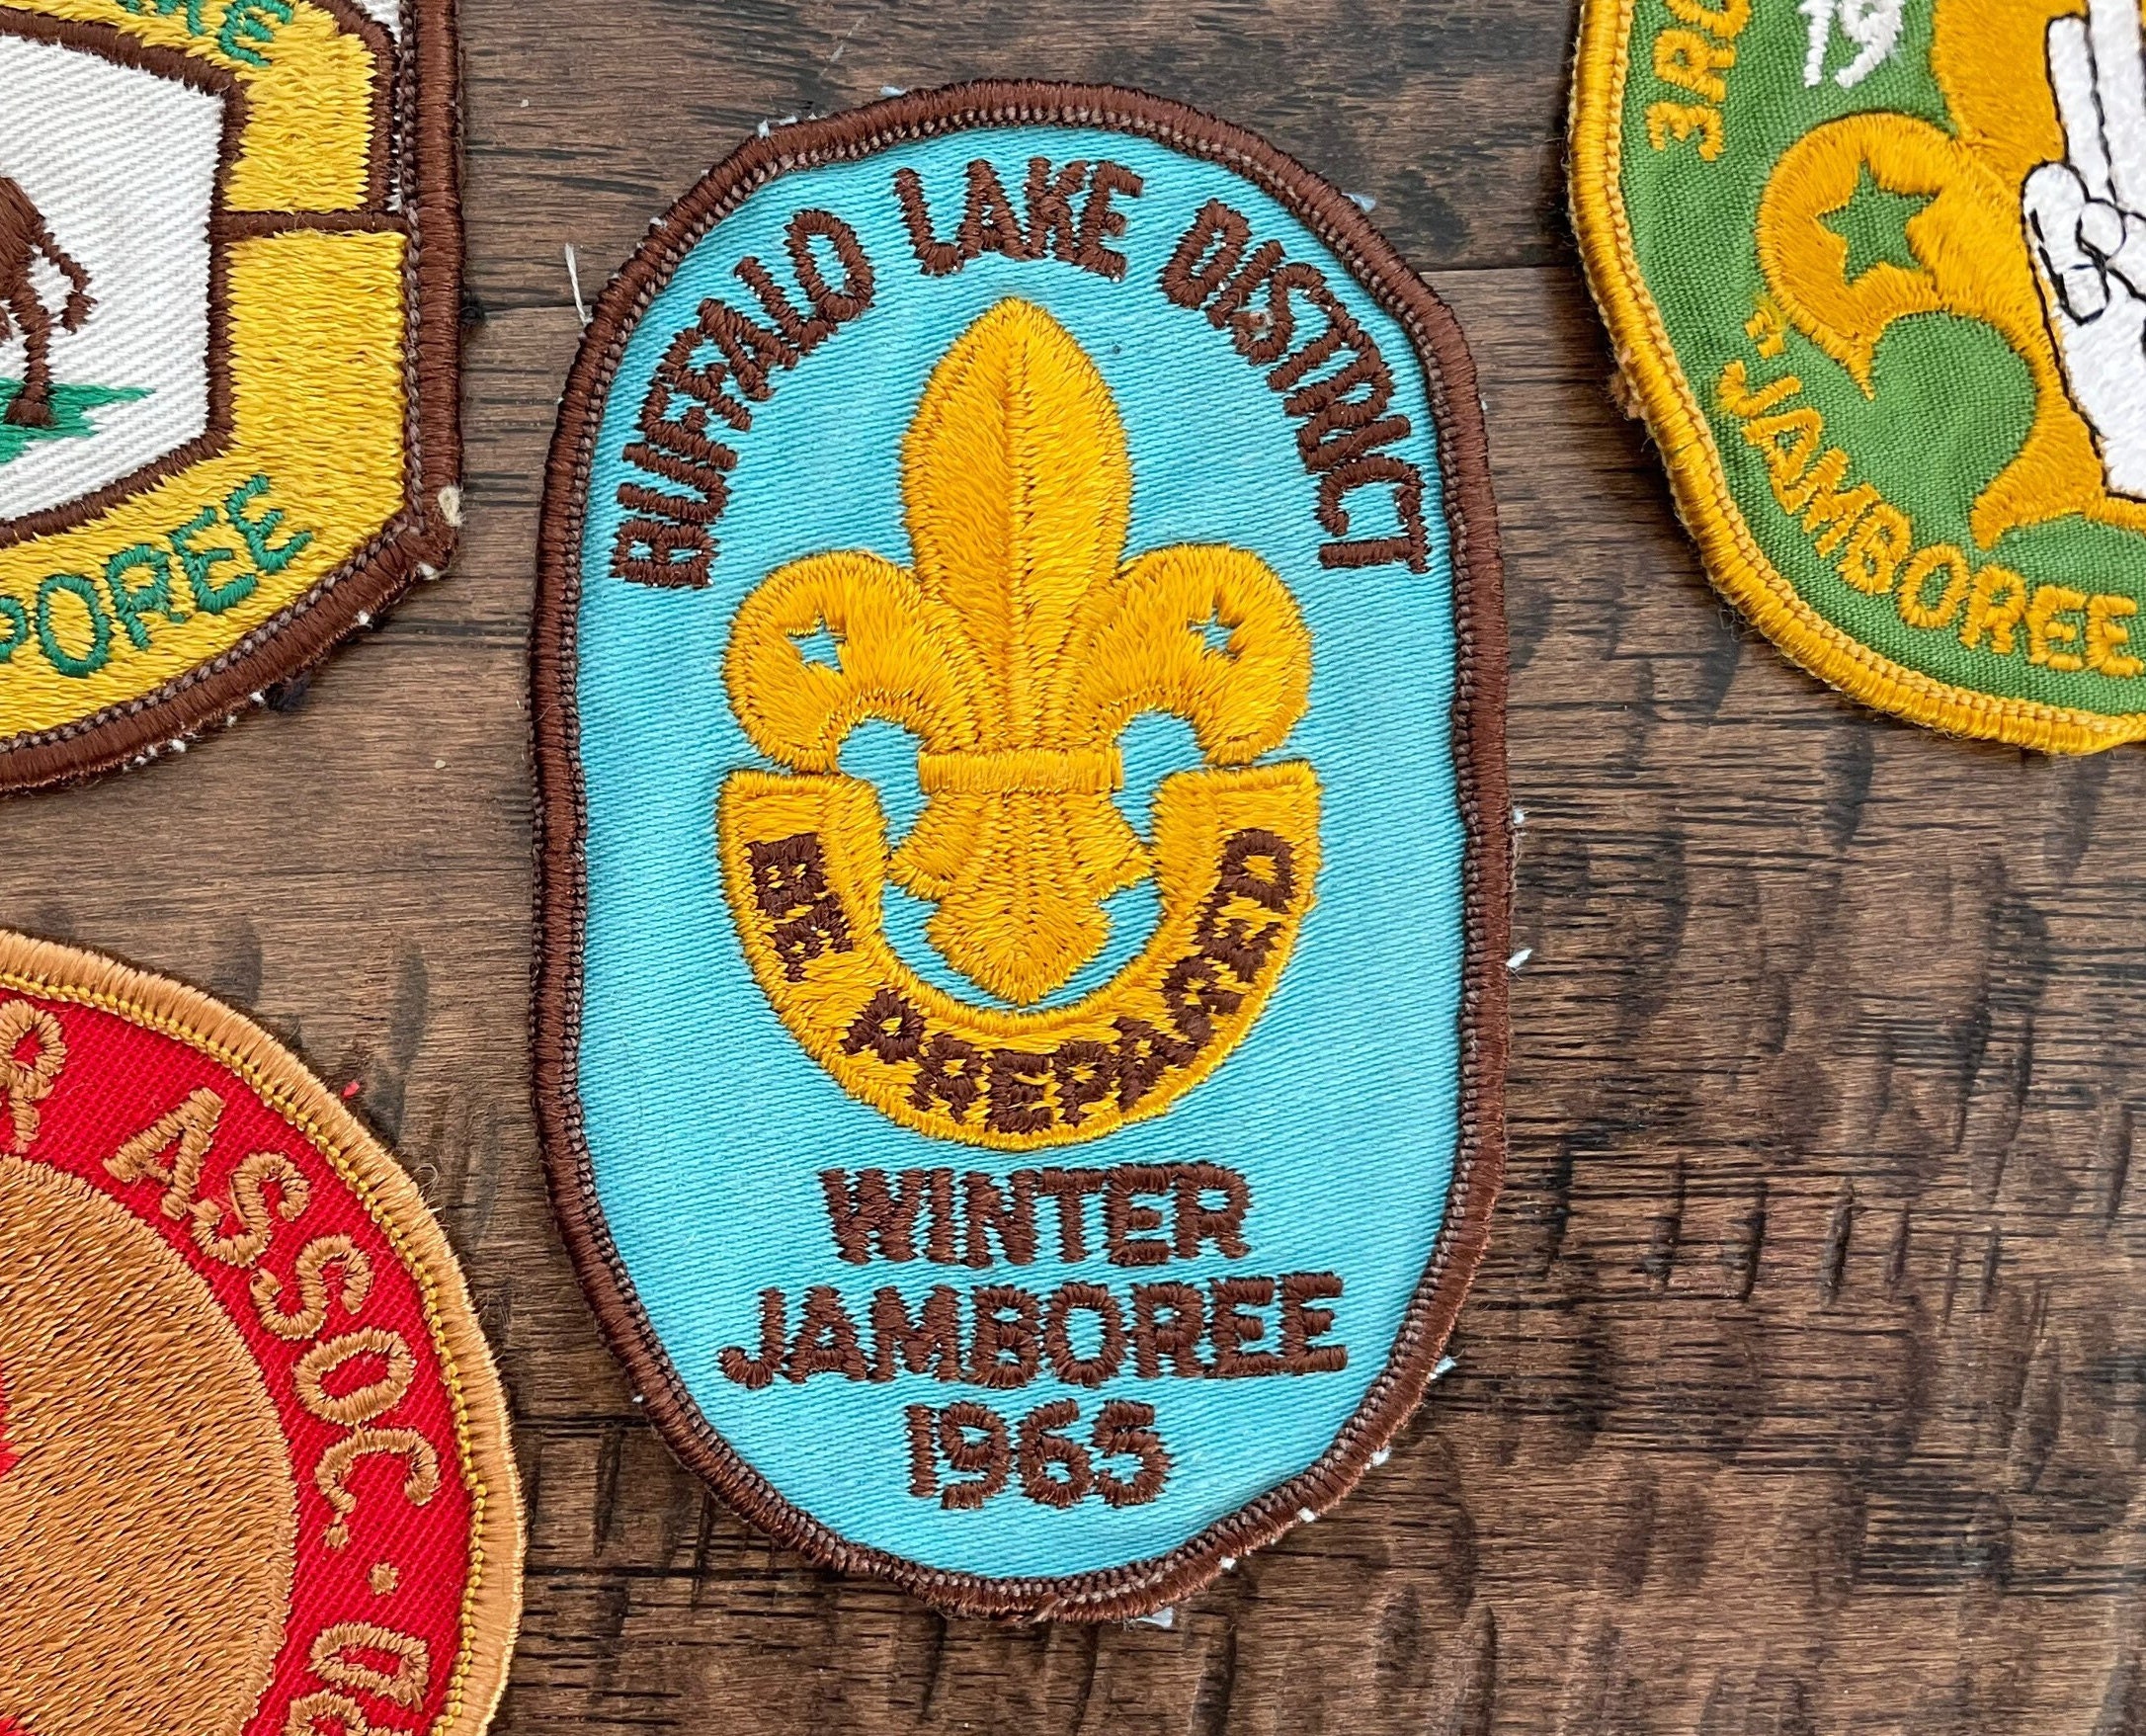 Vintage Patch Sew on Patches Girl Scout Boy Scout Badge Scouts in Action  Camp Trefoil Scouting Memorabilia Mall Patches 